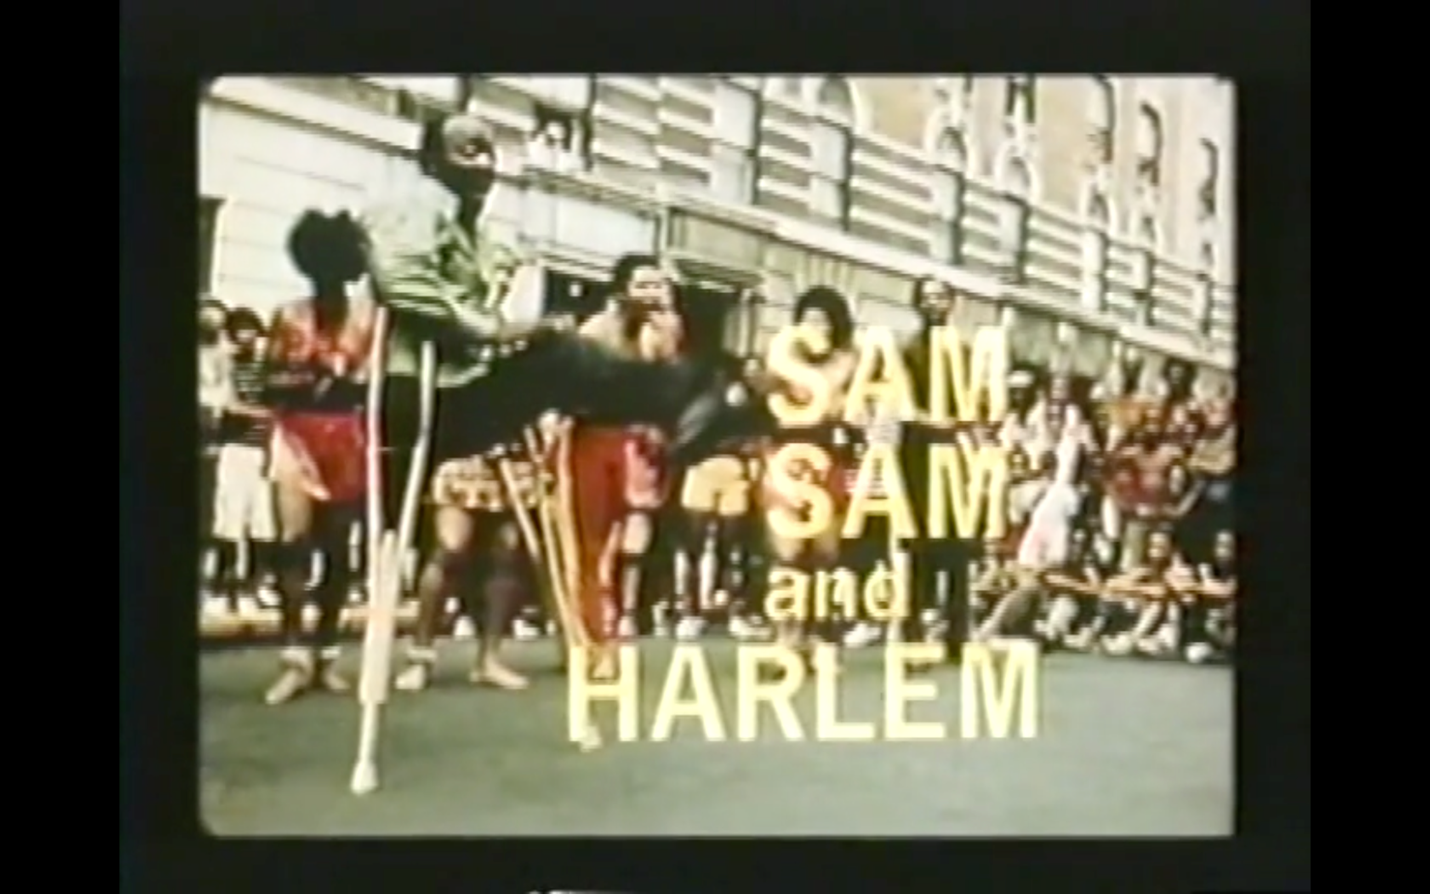 A still image of the title frame of <em>Sam, Sam in Harlem</em>. The title words appear over an exterior scene, shot in color film, of a street celebration. A large crowd, some people seated and some standing, watches dancers, among them a man with one leg who dances while supported by two crutches. In this still, his leg is aloft, seemingly at the apex of his kick's arc. The image is used with permission of Oren Jacoby.